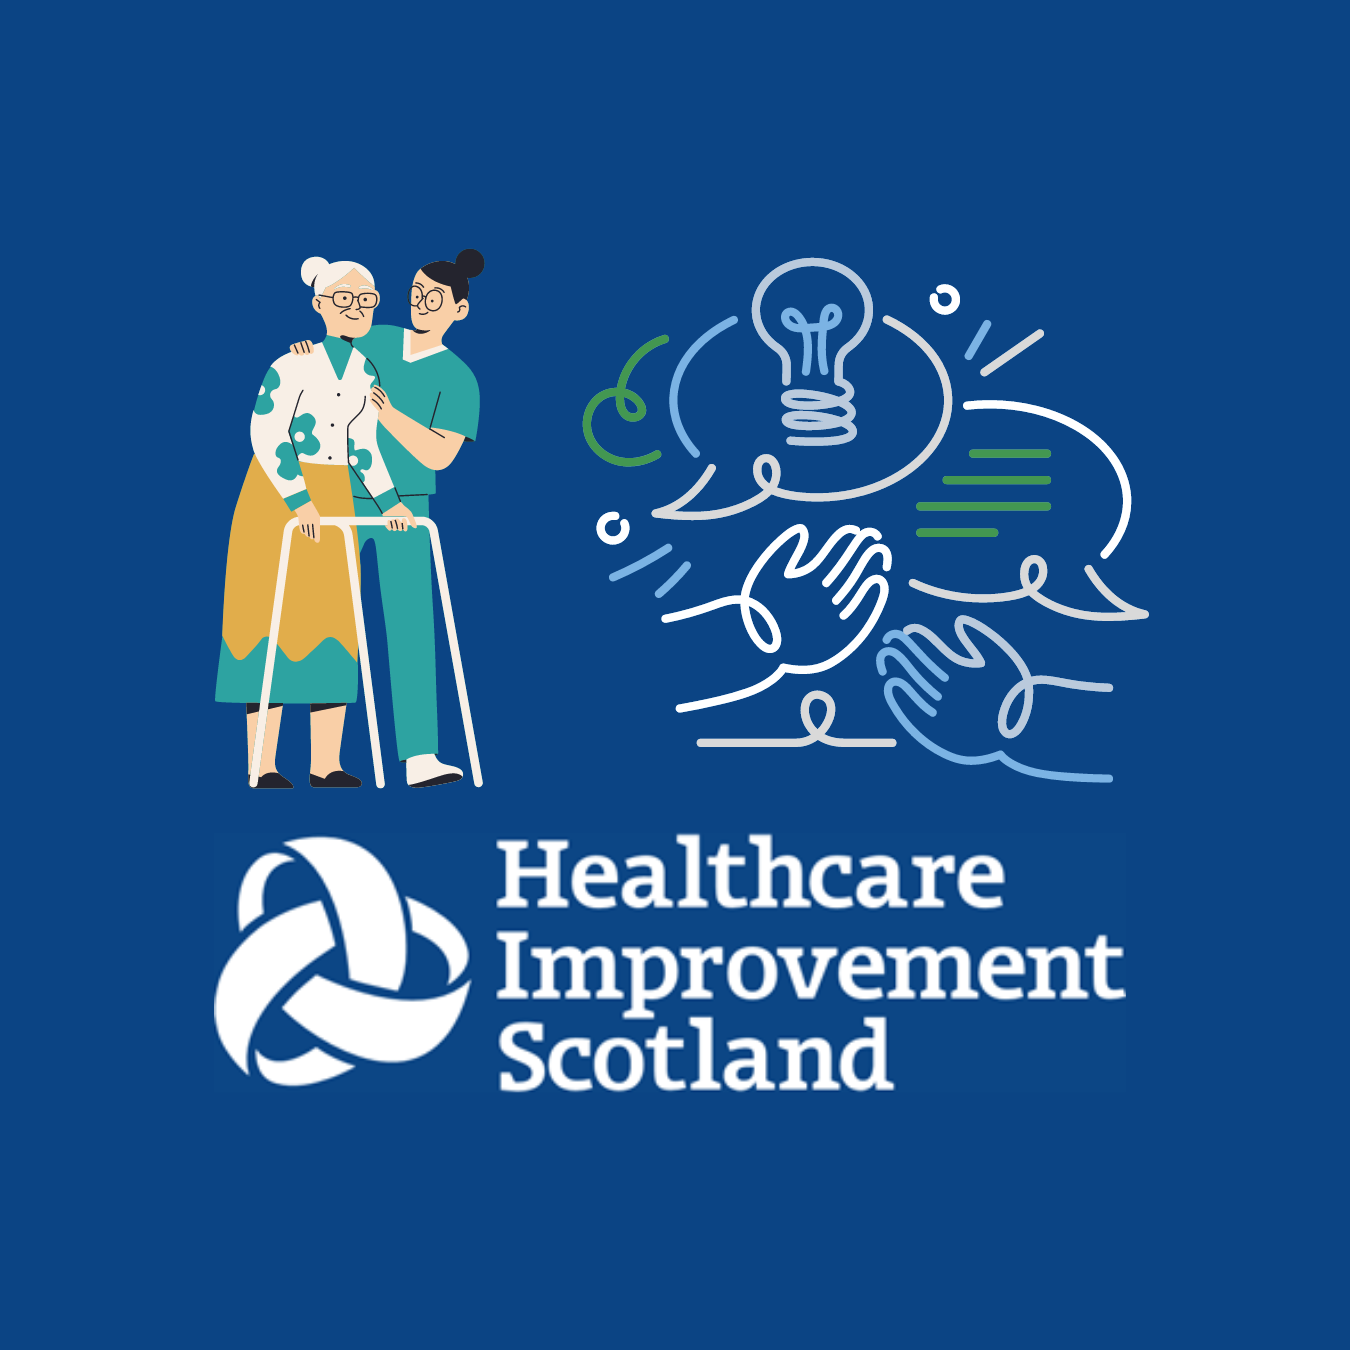 Healthcare improvement Scotland consultation share your views - pic has older person with walking frame with carer and thought speech bubbles